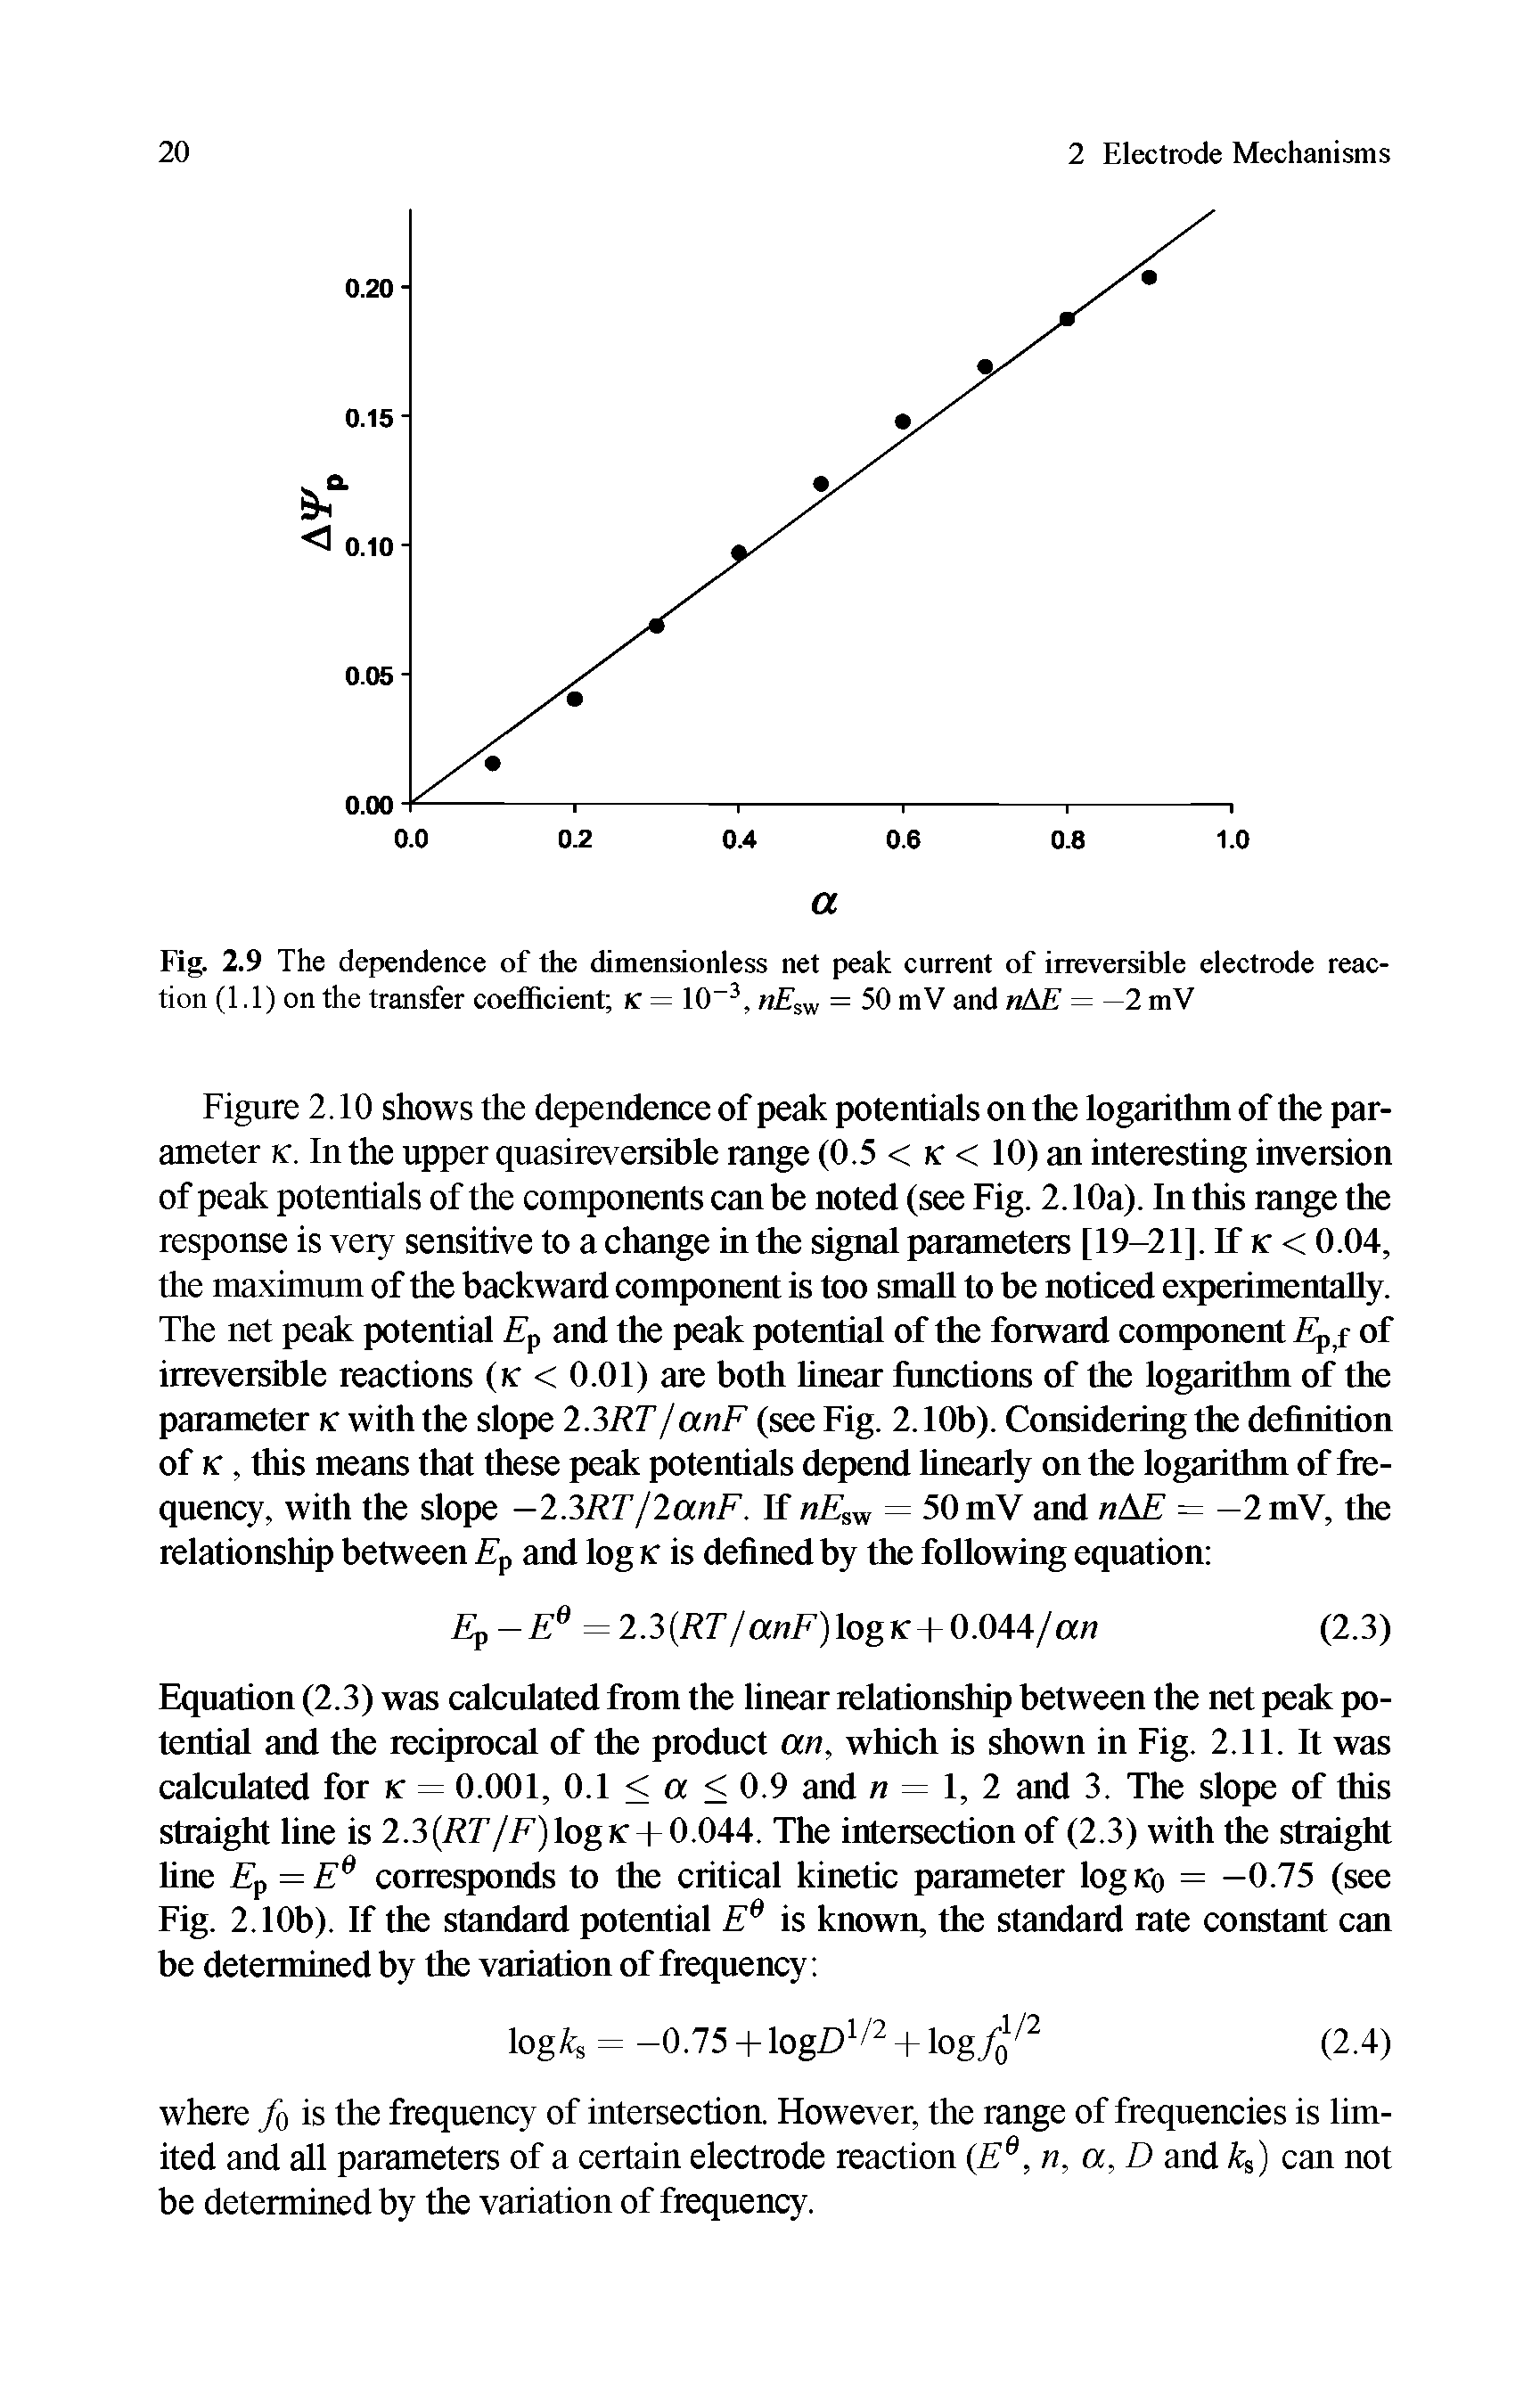 Fig. 2.9 The dependence of the dimensionless net peak current of irreversible electrode reaction (1.1) on the transfer coefficient k = 10 , rtEsv, = 50 mV and nAE = —2 mV...